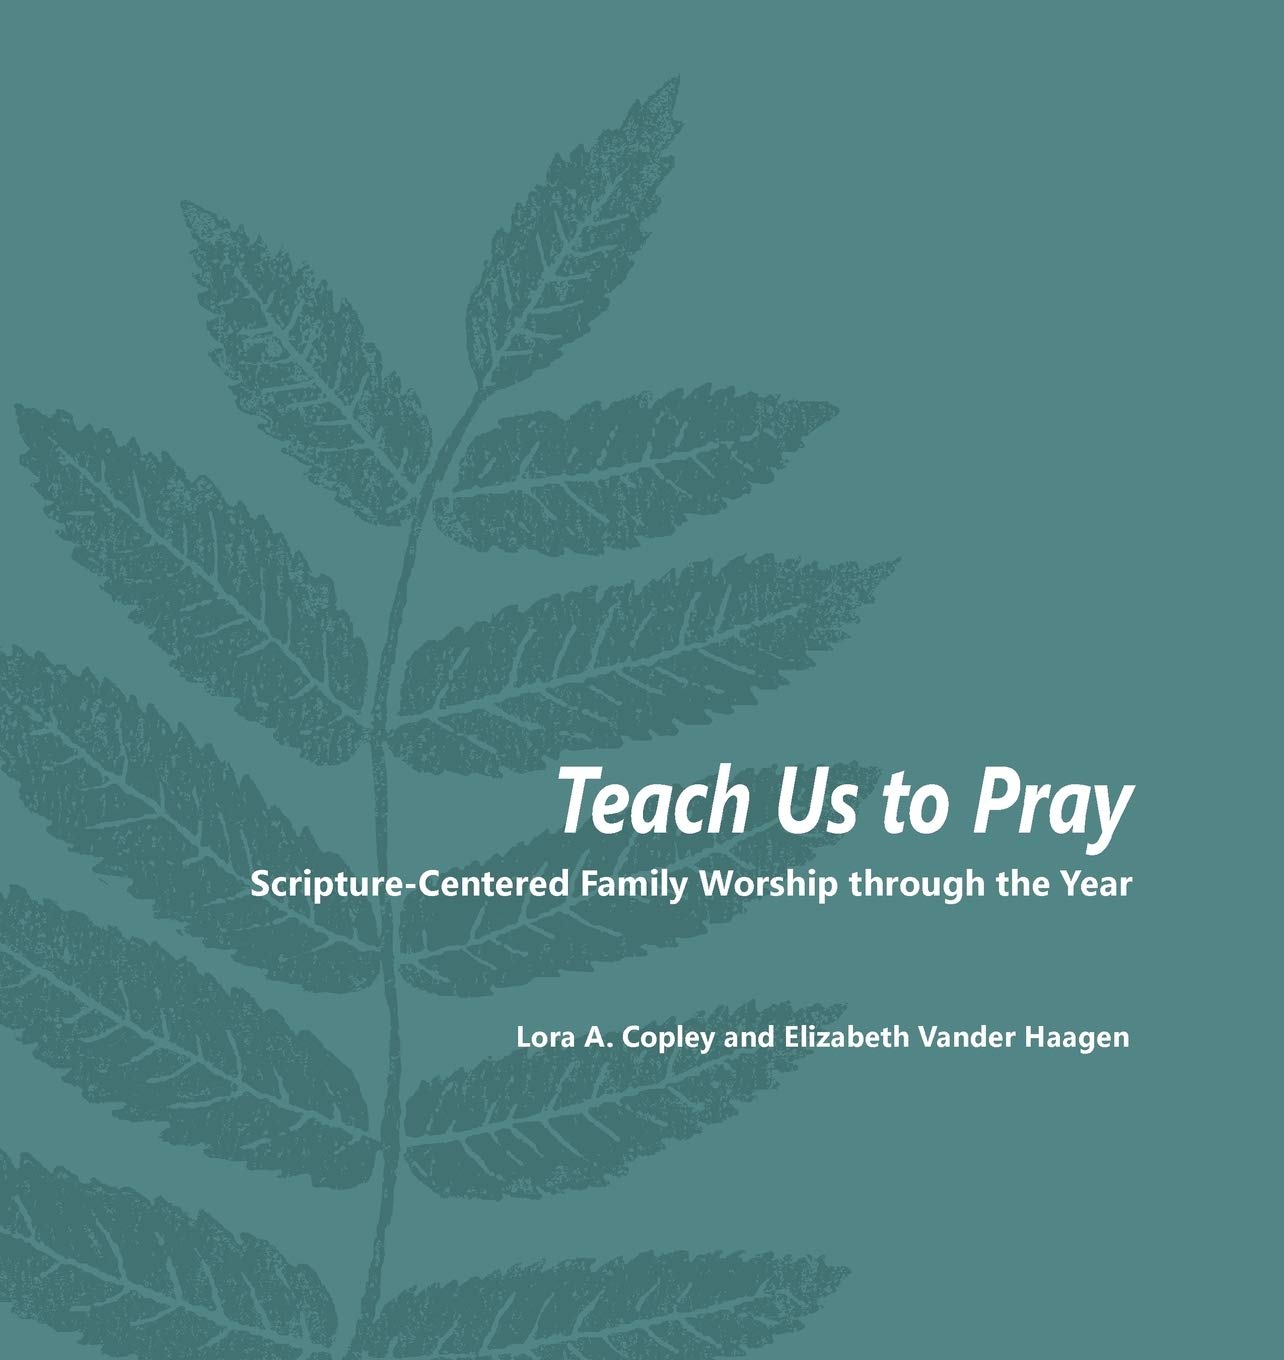 Teach Us to Pray: Scripture-Centered Family Worship through the Year